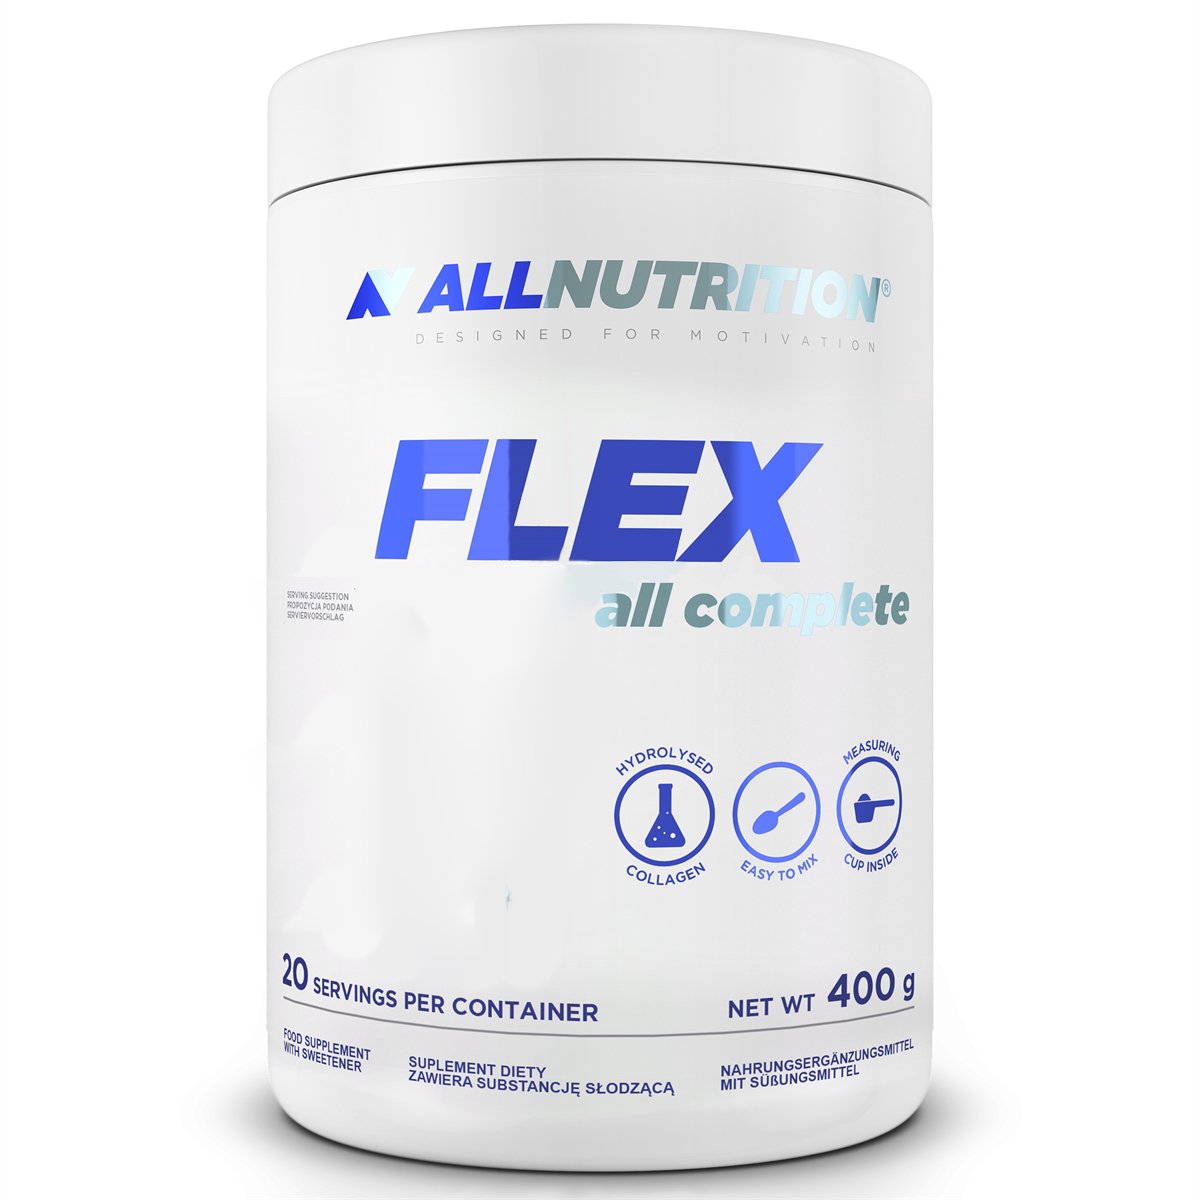 Для суставов и связок AllNutrition Flex All Complete, 400 грамм Ананас,  ml, AllNutrition. For joints and ligaments. General Health Ligament and Joint strengthening 